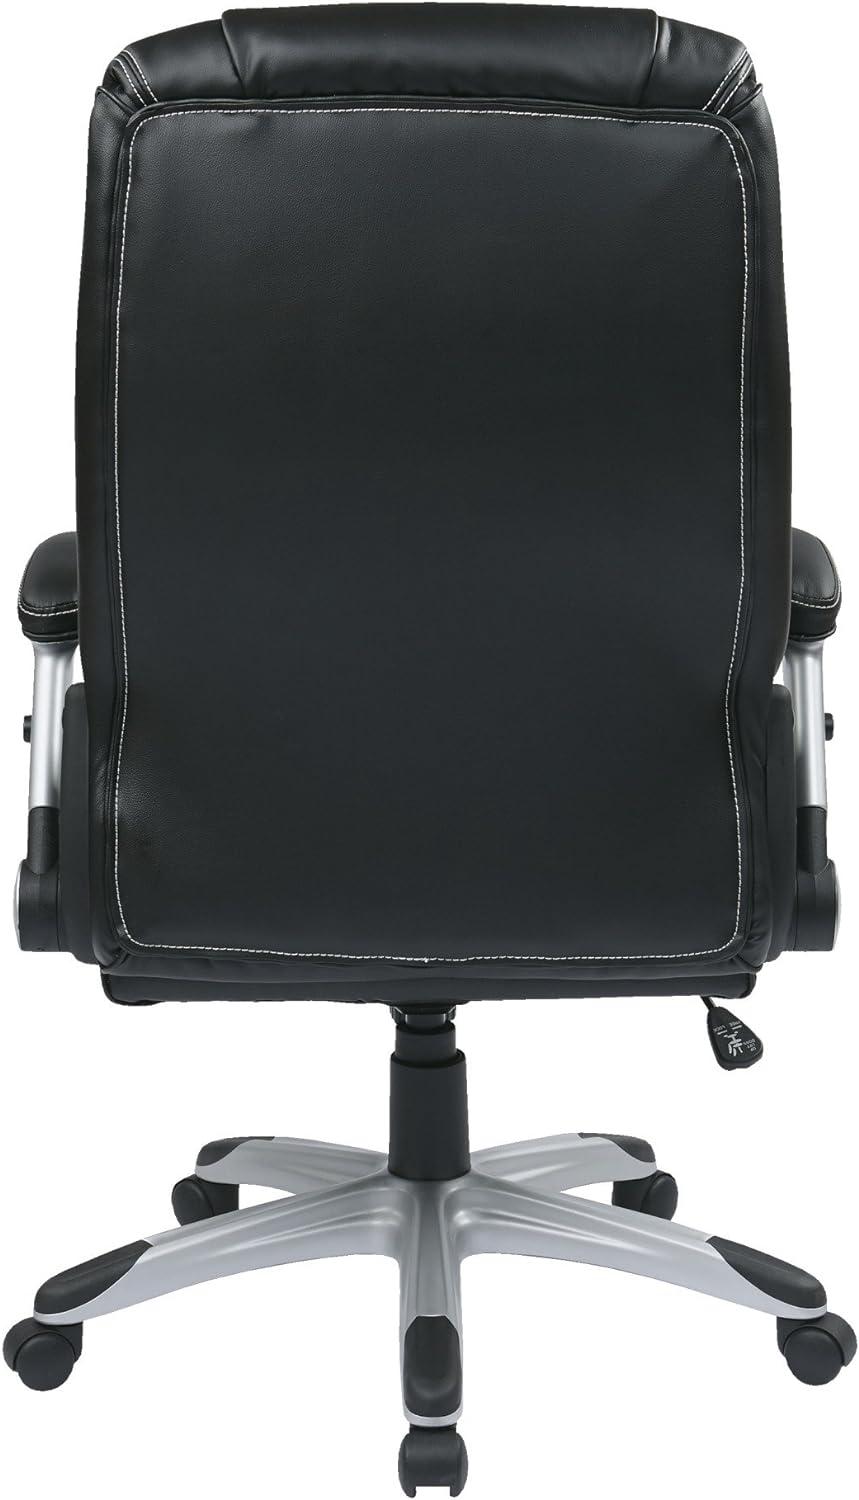 ErgoExec High-Back Swivel Black Leather Executive Chair with Adjustable Arms